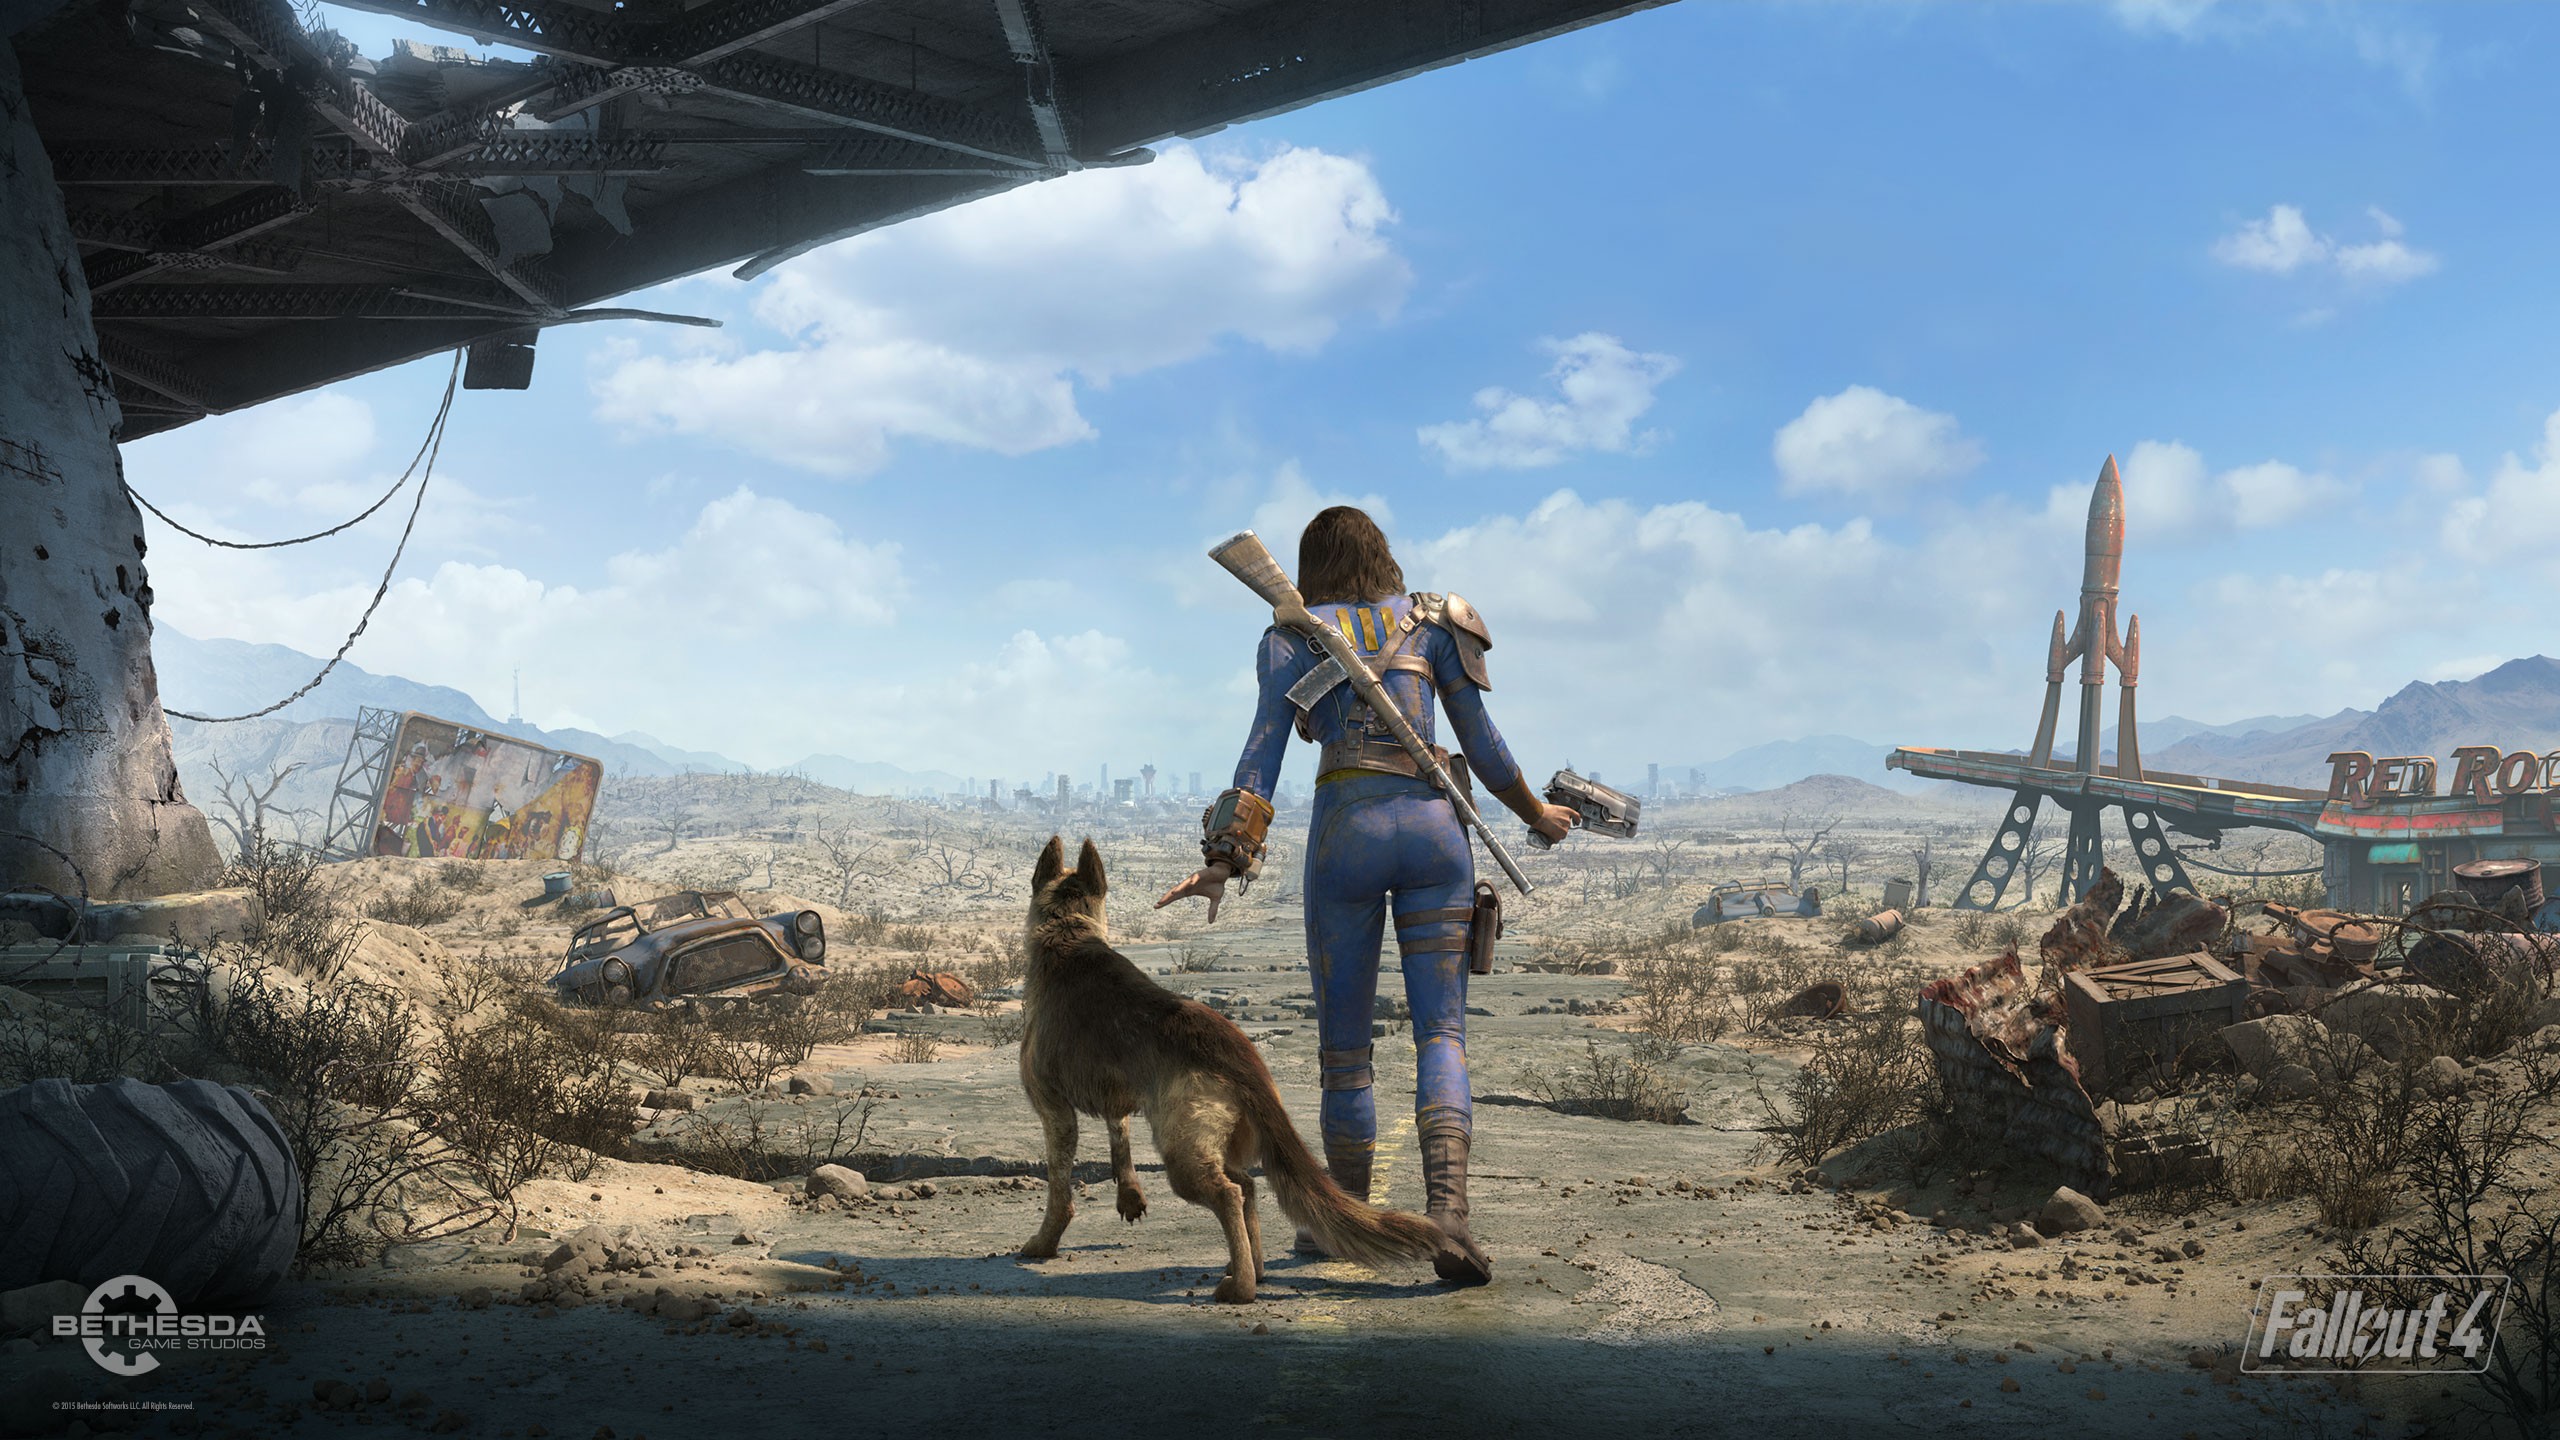 Vaultgirl Fallout 4 Pc Gaming Wallpapers Hd Desktop And Mobile Backgrounds